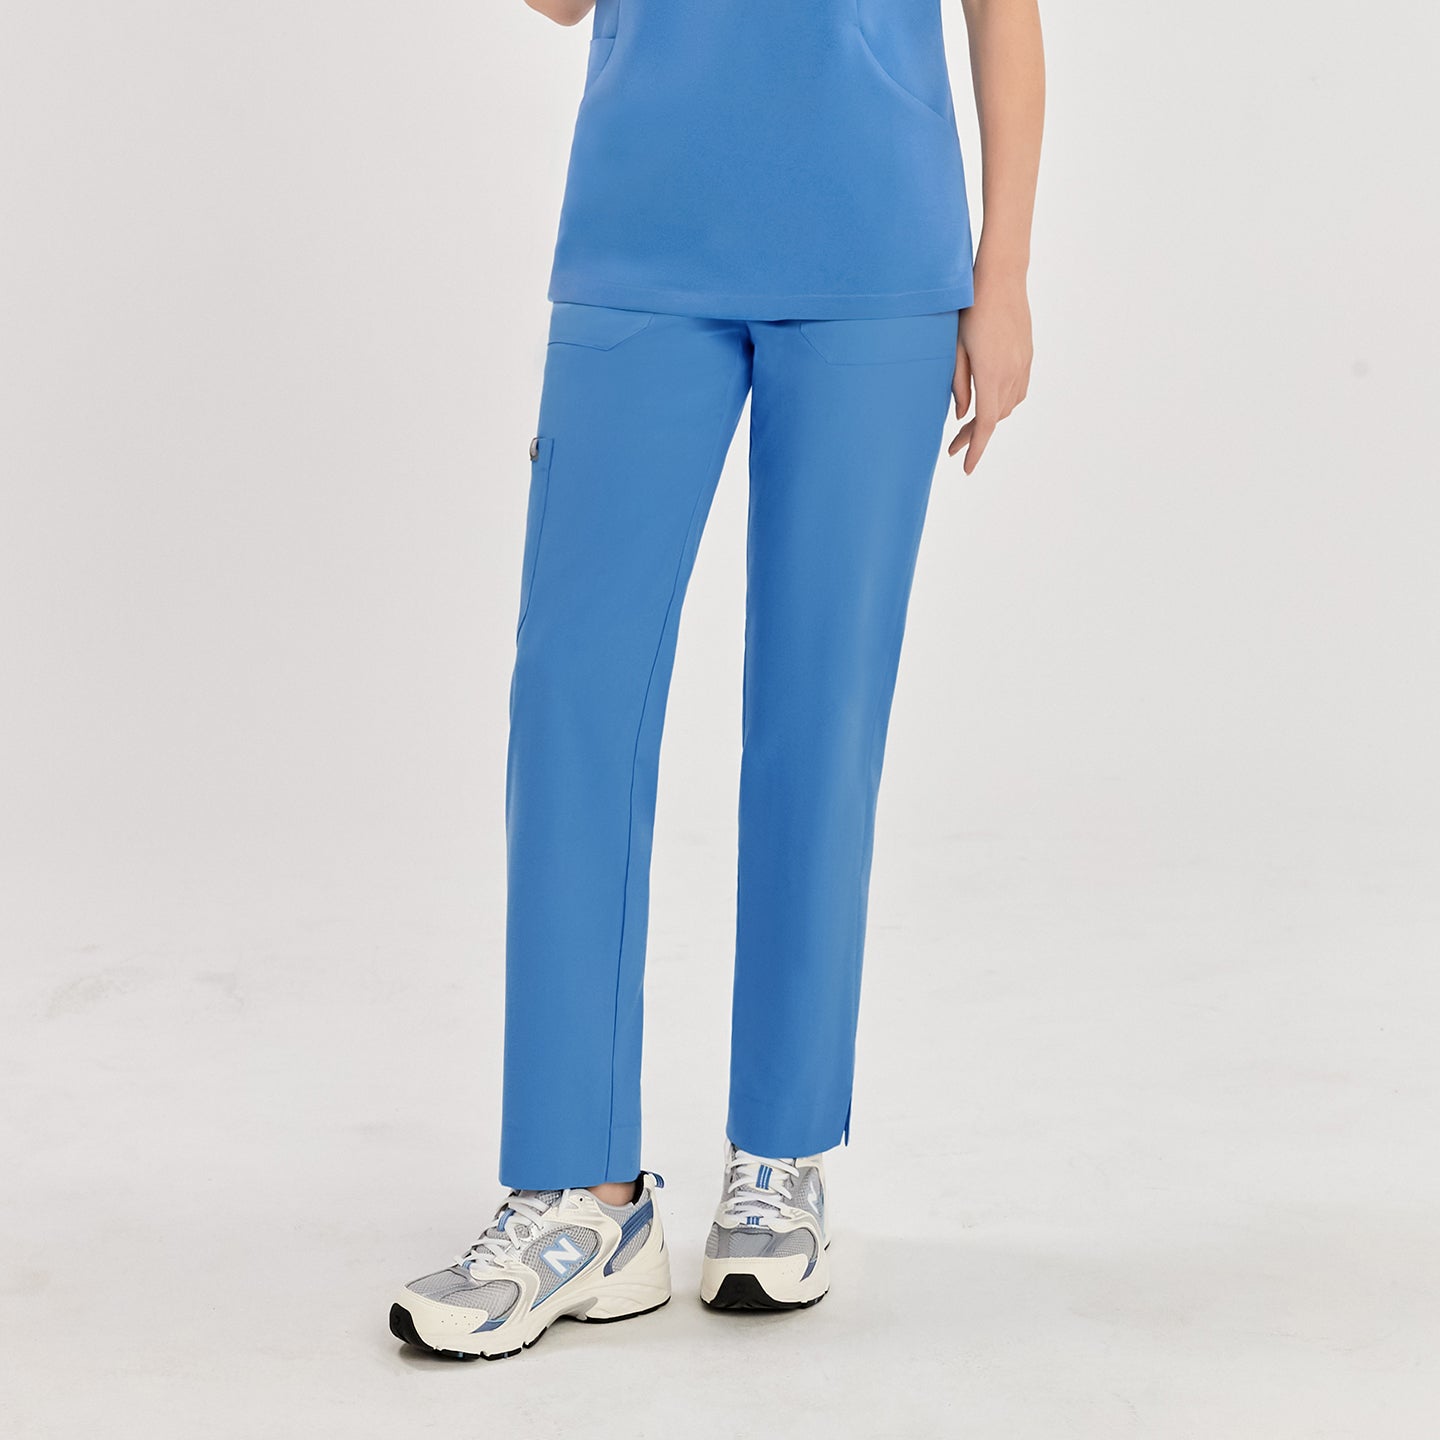 Woman in sky blue zipper slit scrub pants and matching top, showcasing the pants from the front,Sky Blue